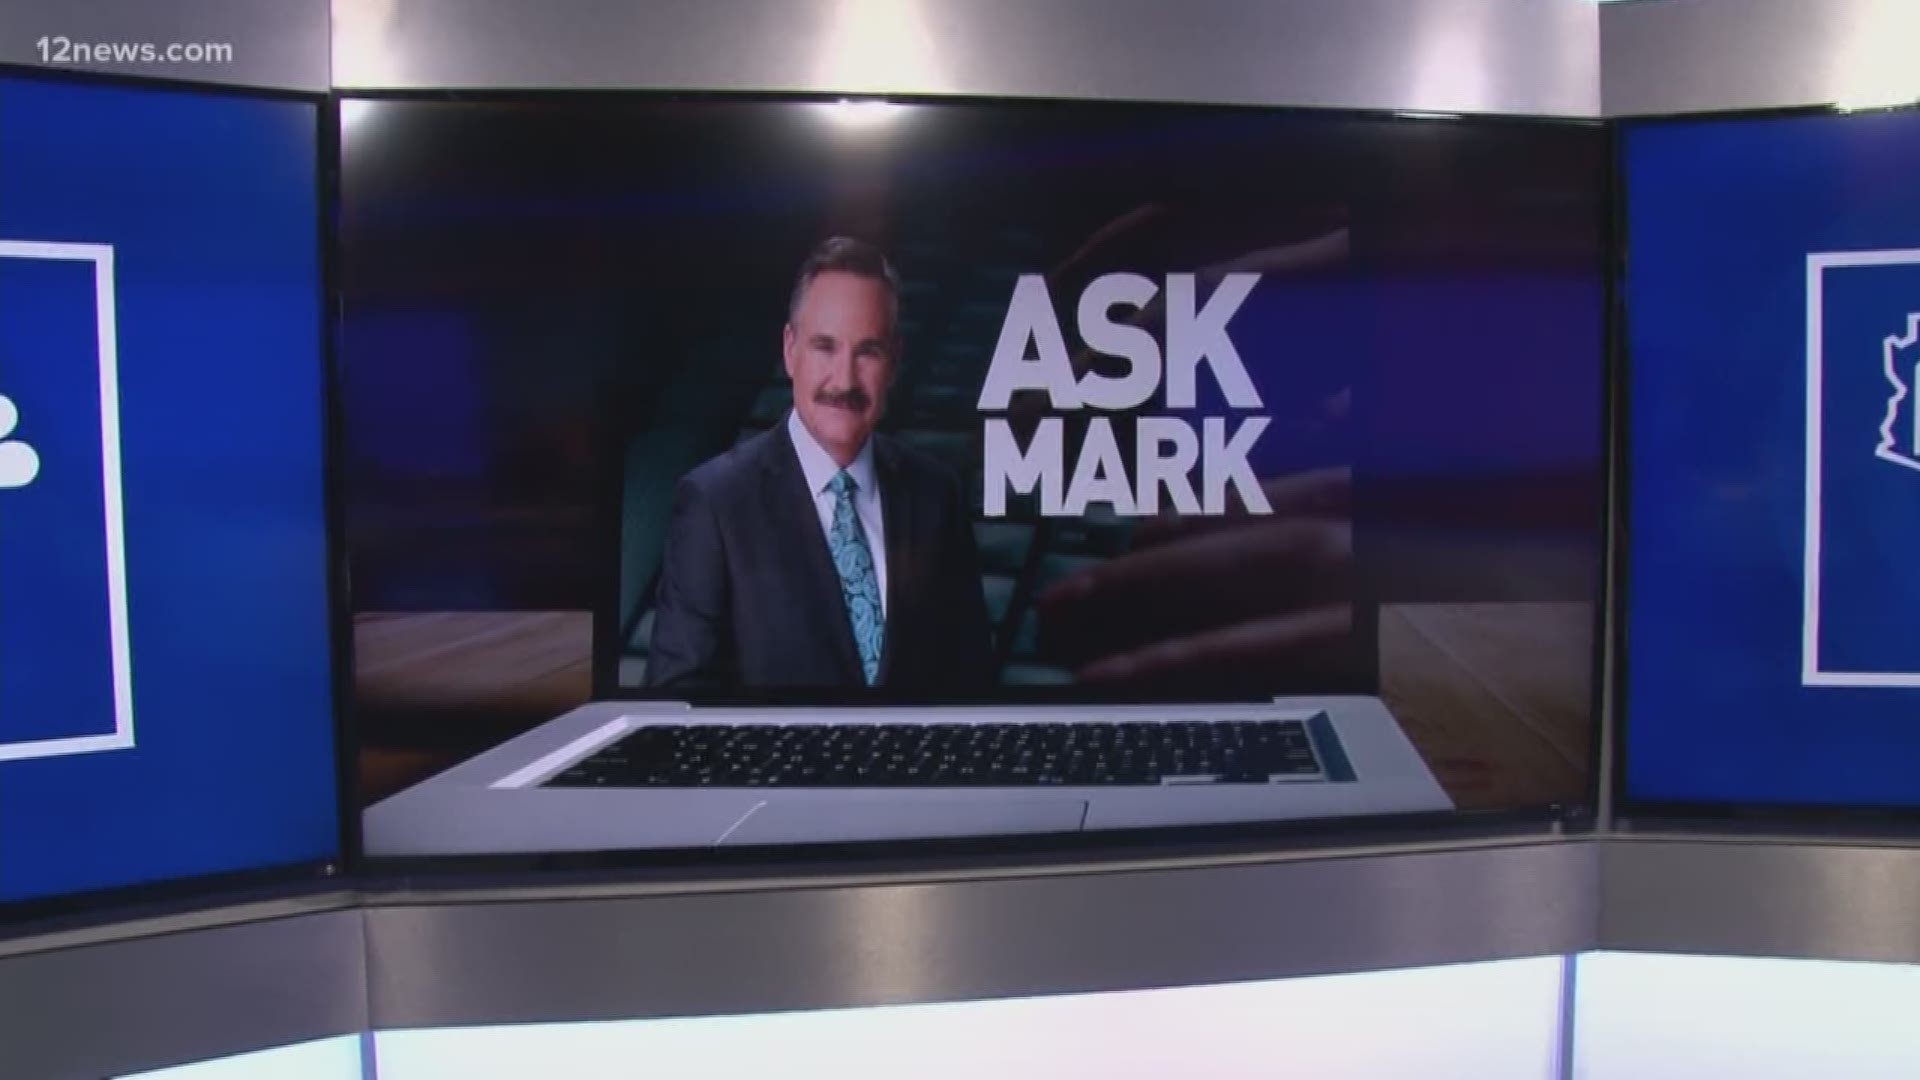 One viewer wanted to know where Mark went to college. Check out his answer!